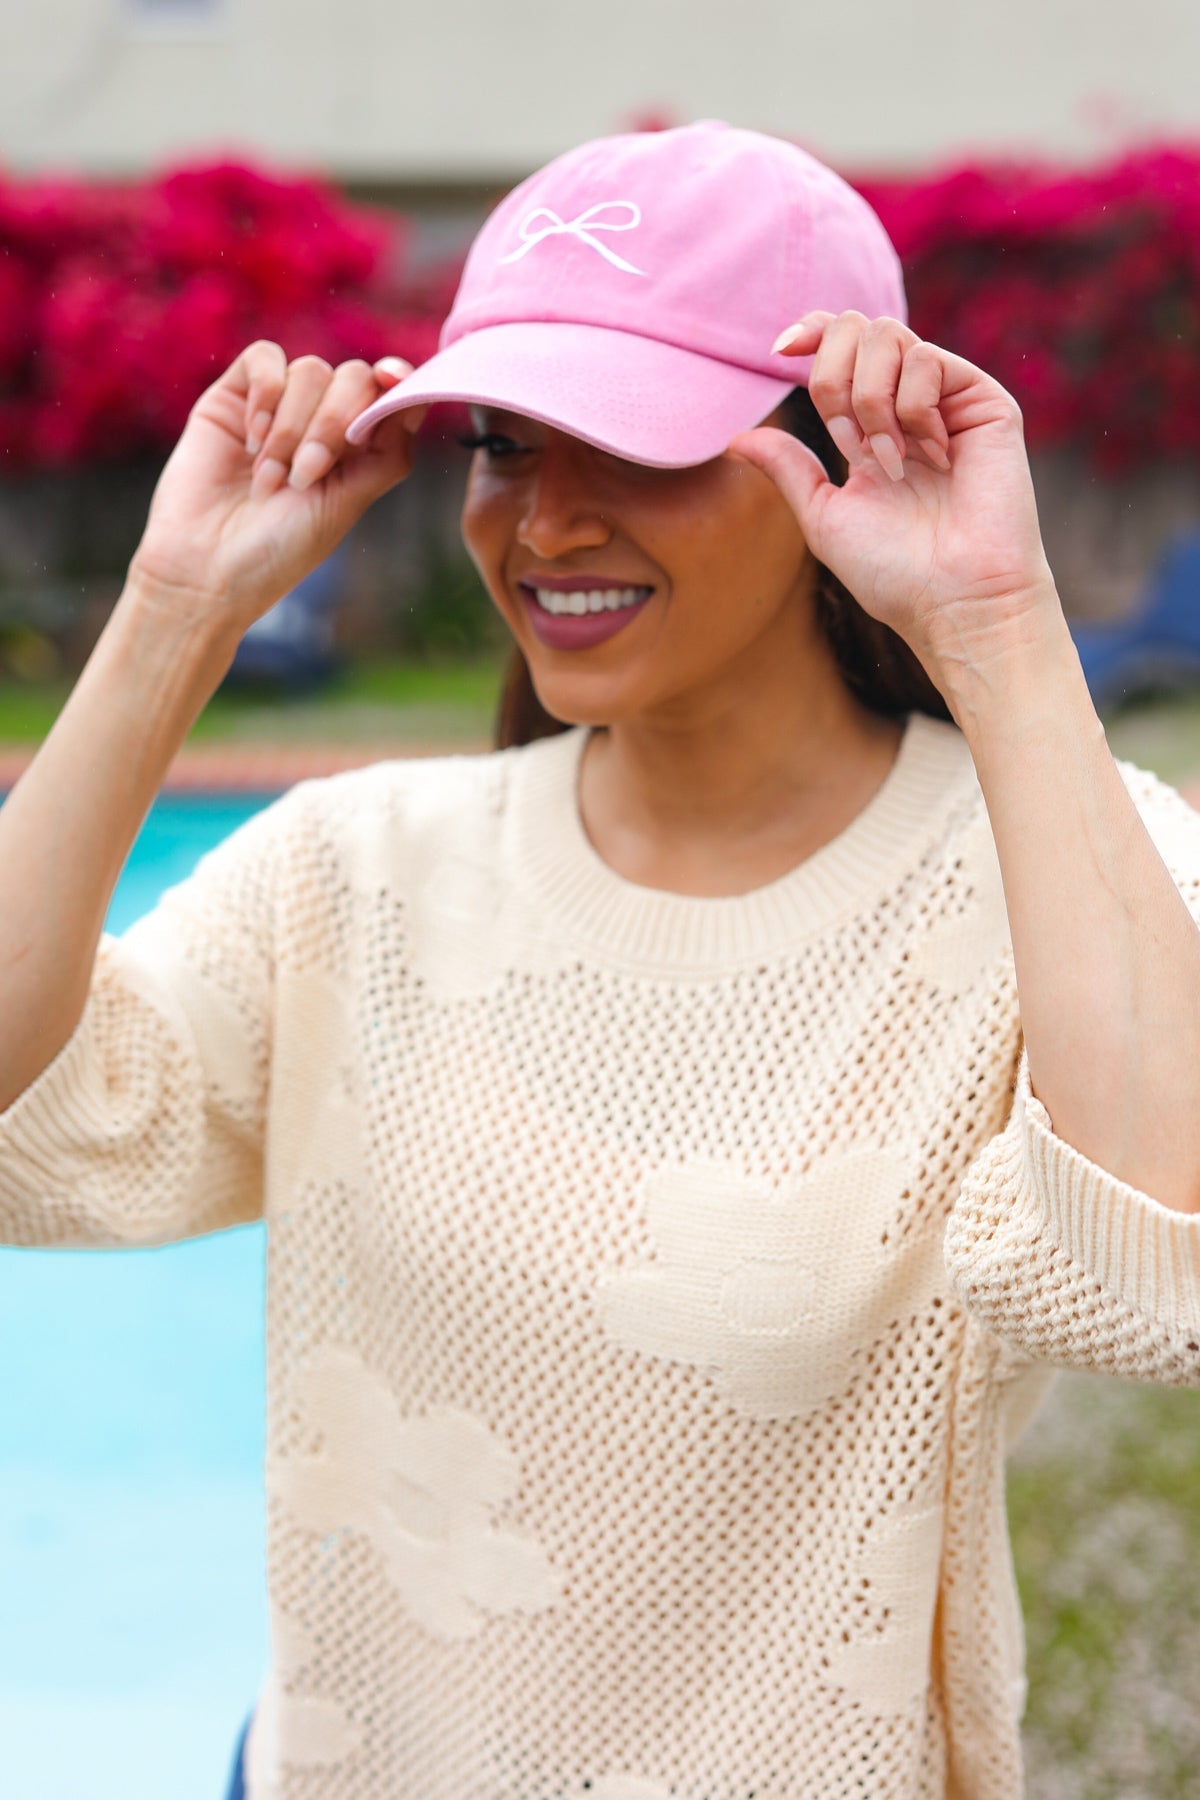 Pink Embroidered Bow Baseball Cap